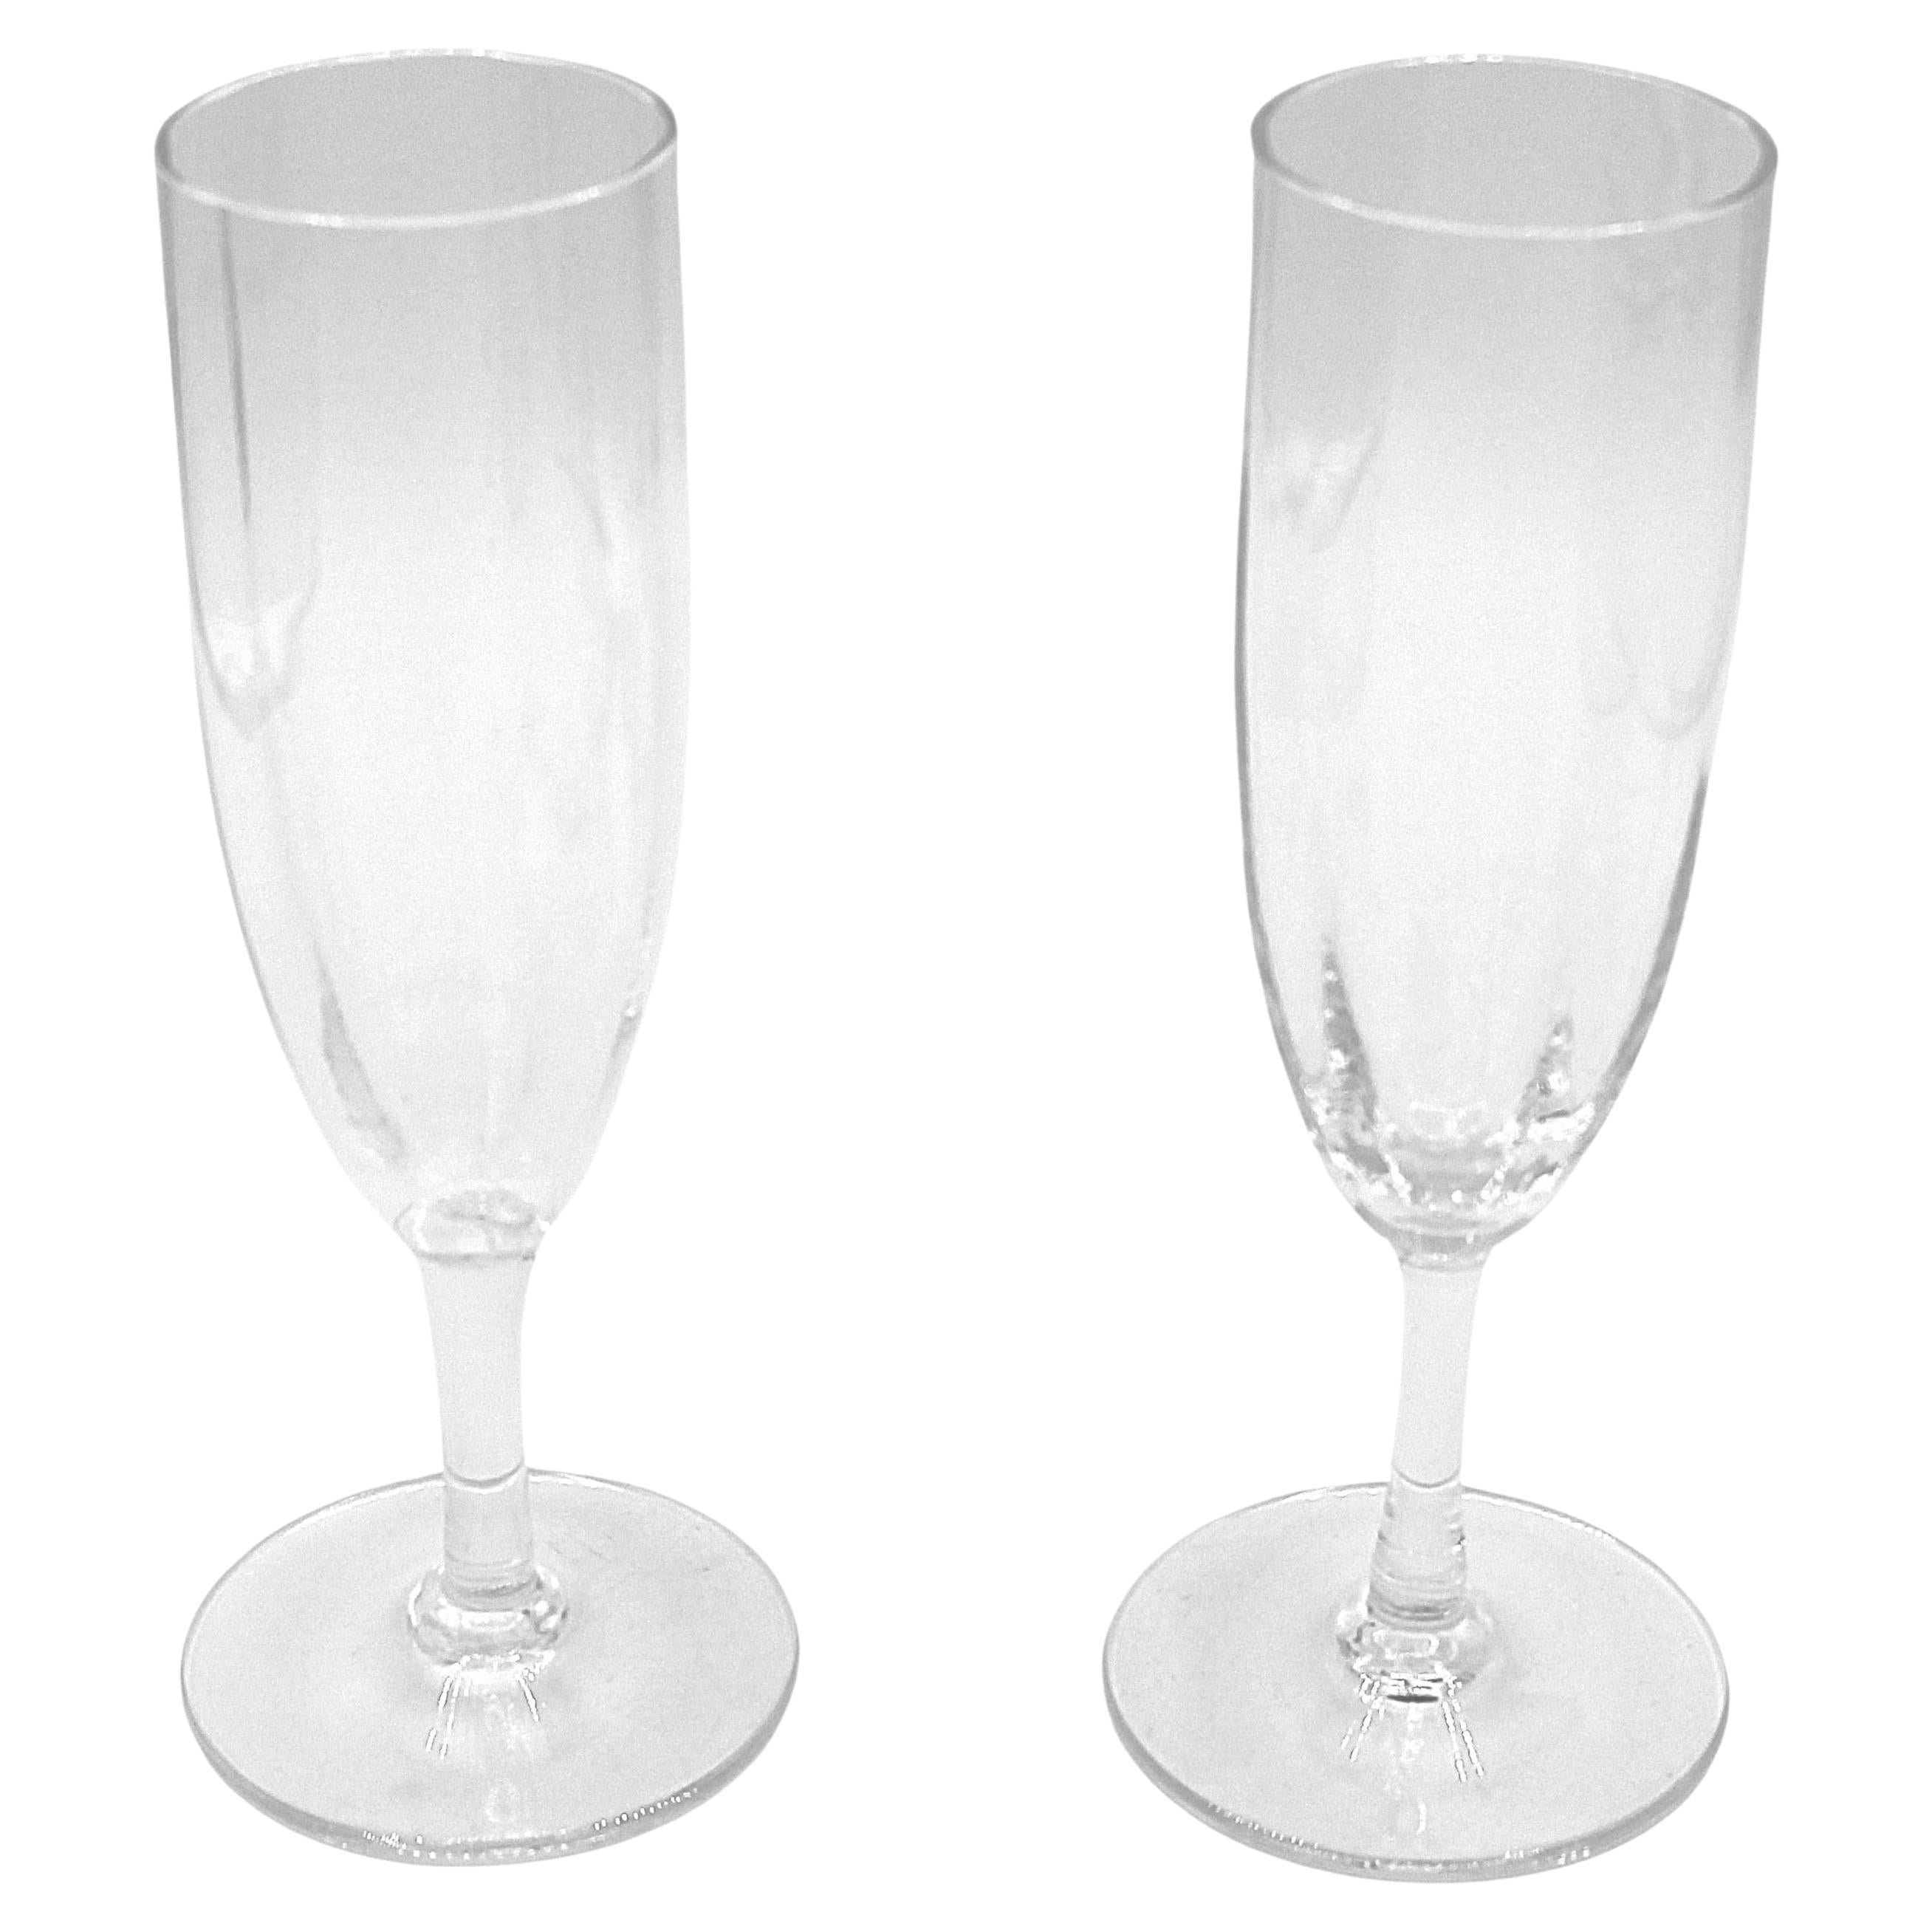 Pair of Baccarat Montaigne Optic Champagne Flutes